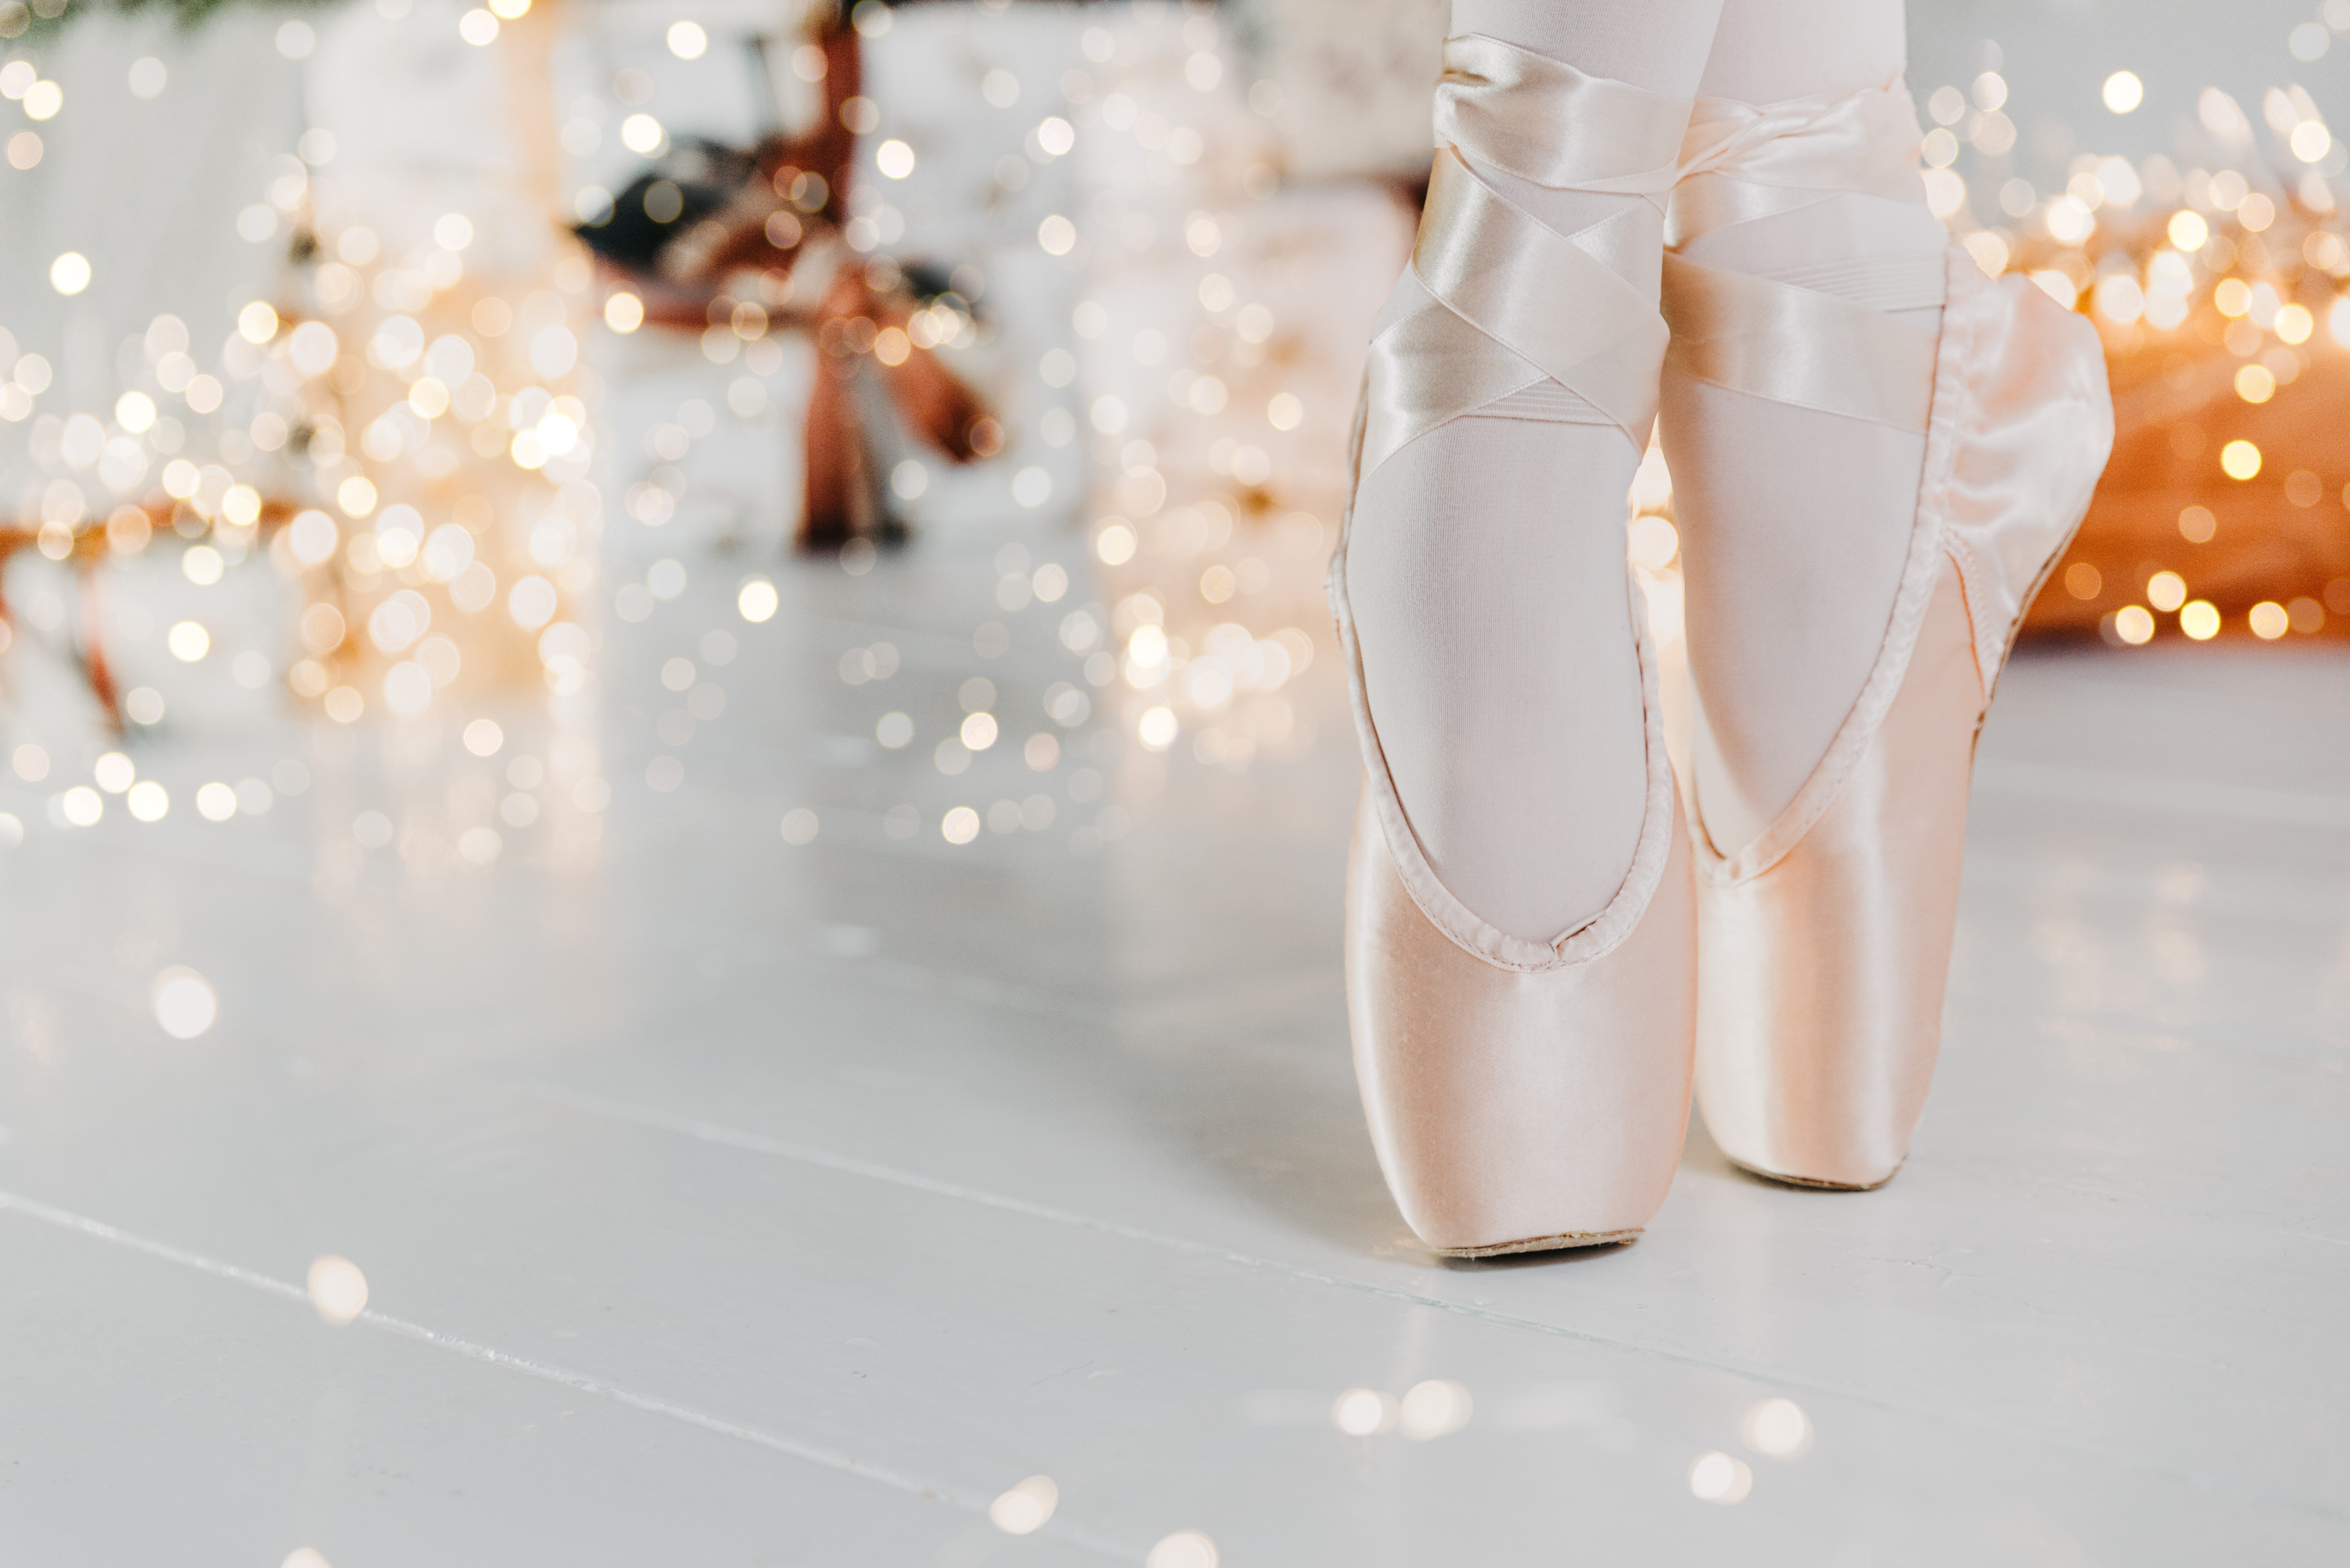 Wallpaper for mobile devices miscellaneous, miscellanea, pointe shoes, ribbons